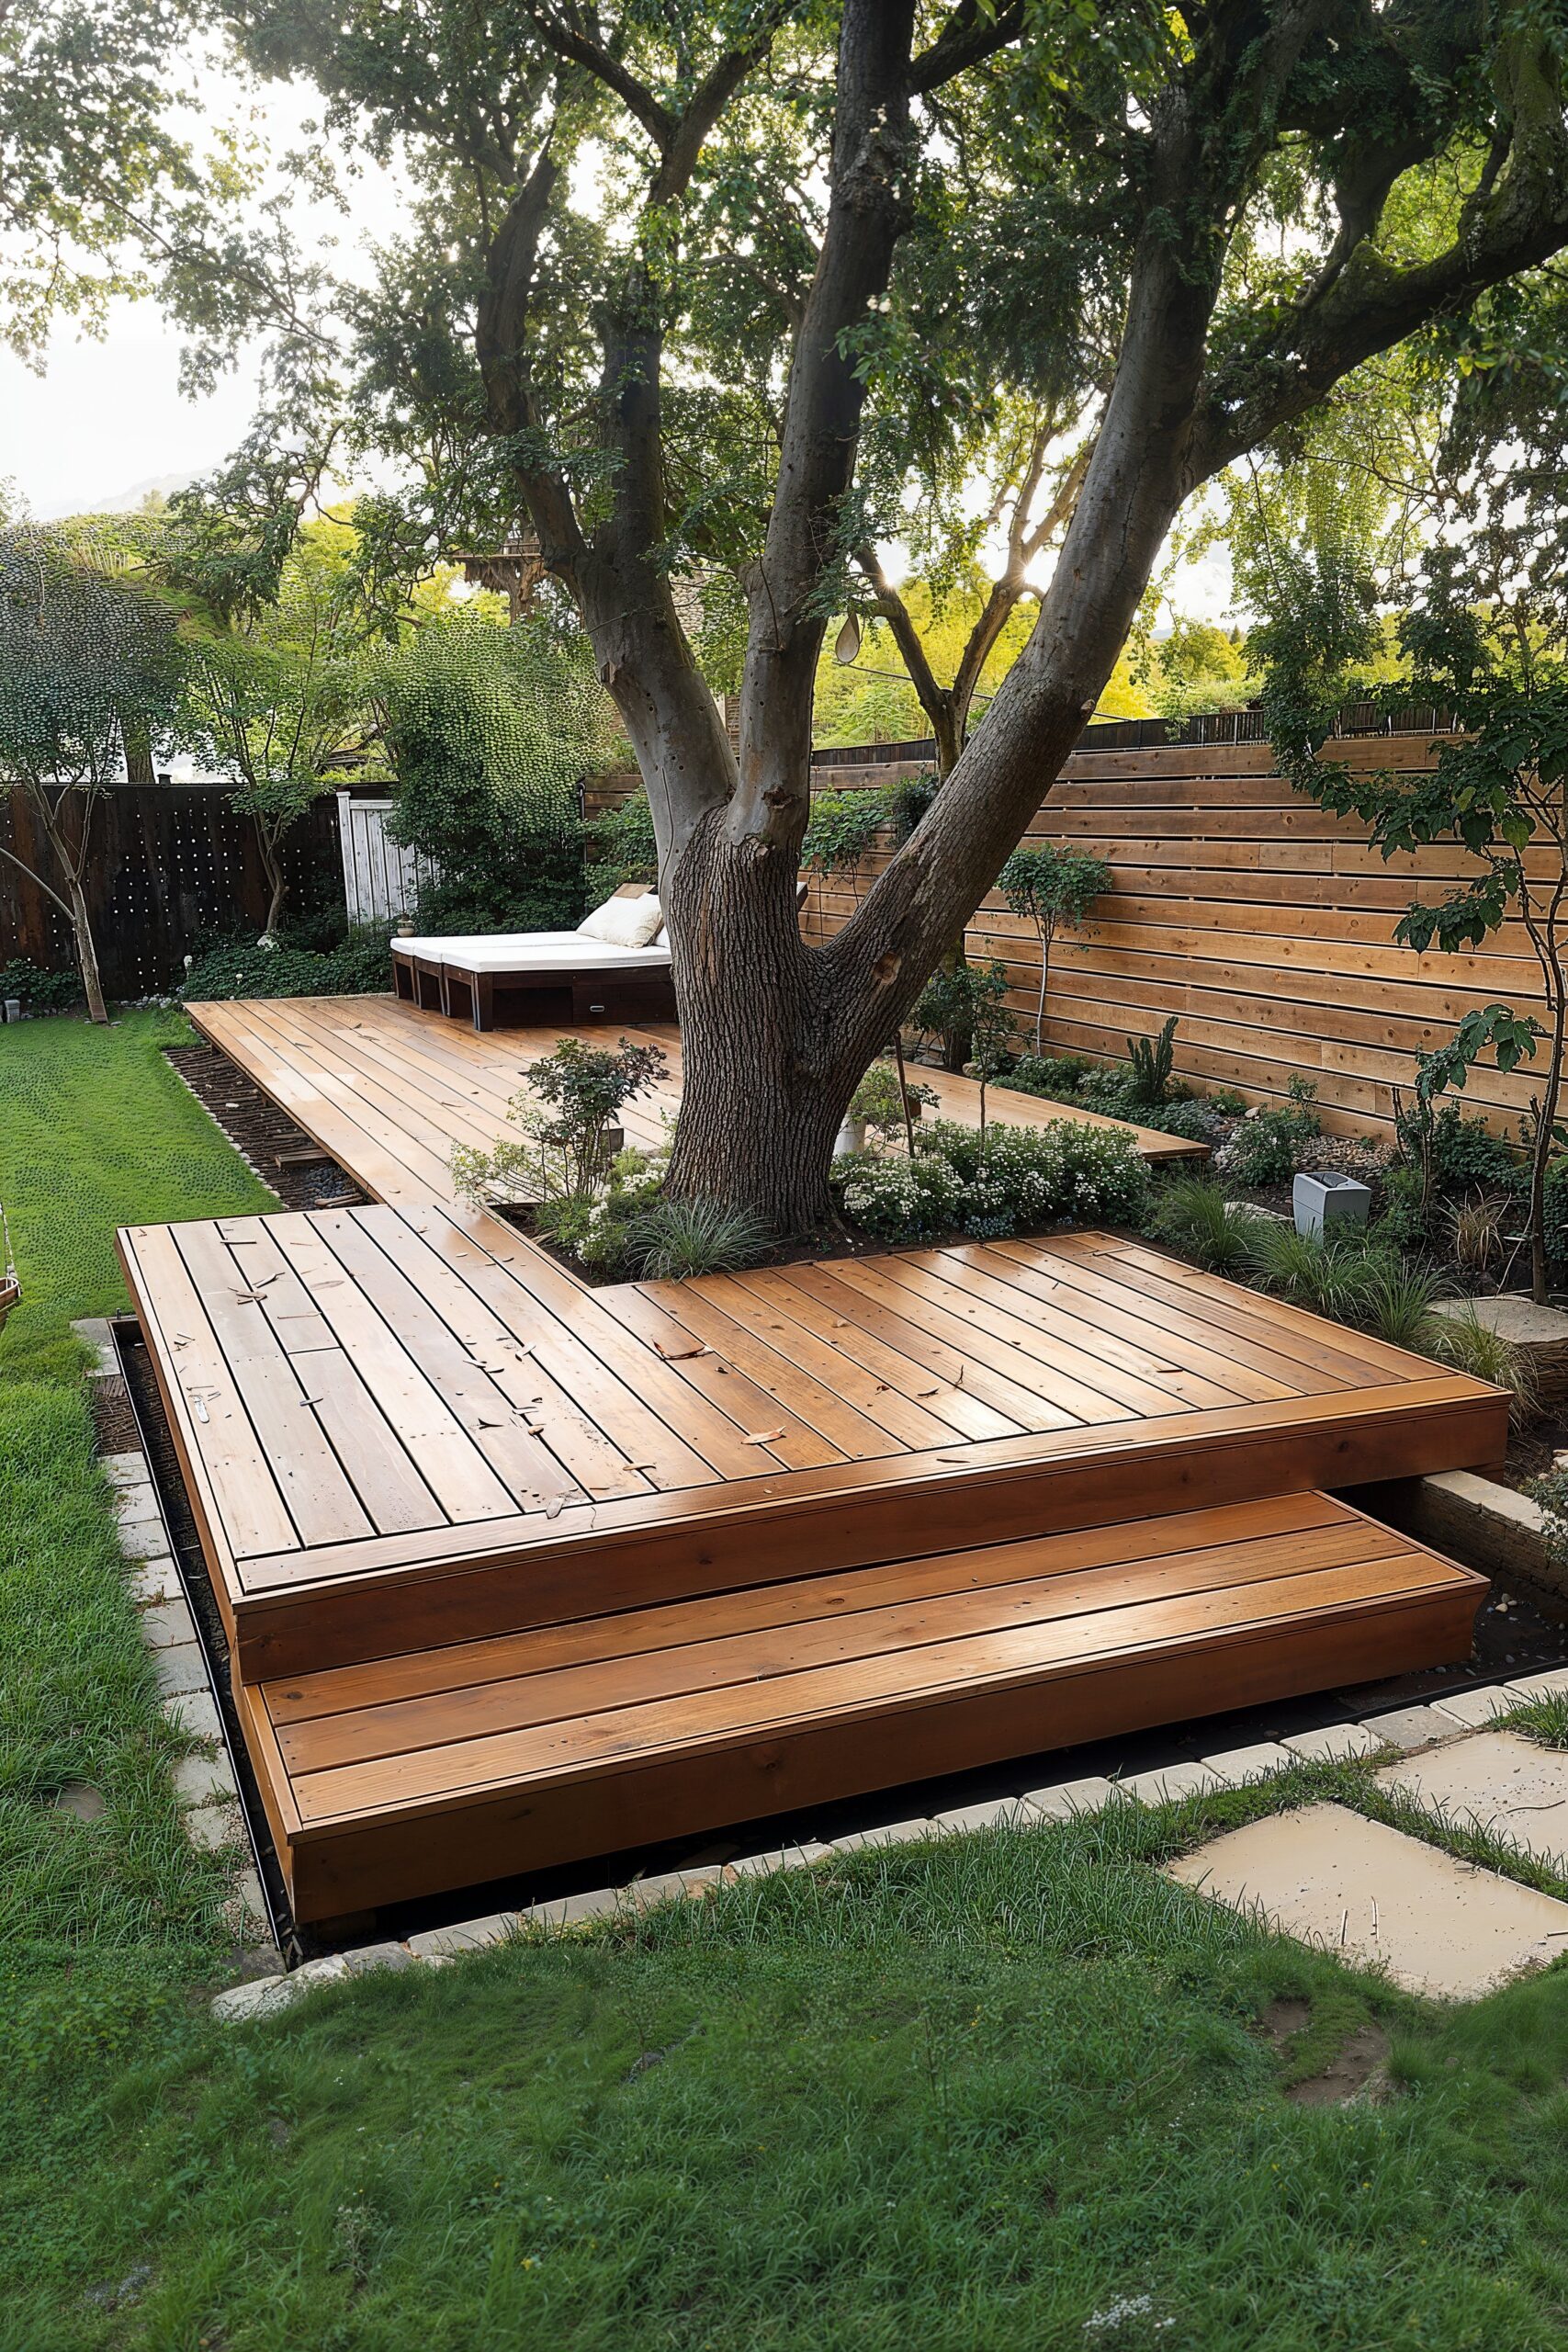 The Benefits of Adding Decking to Your Garden